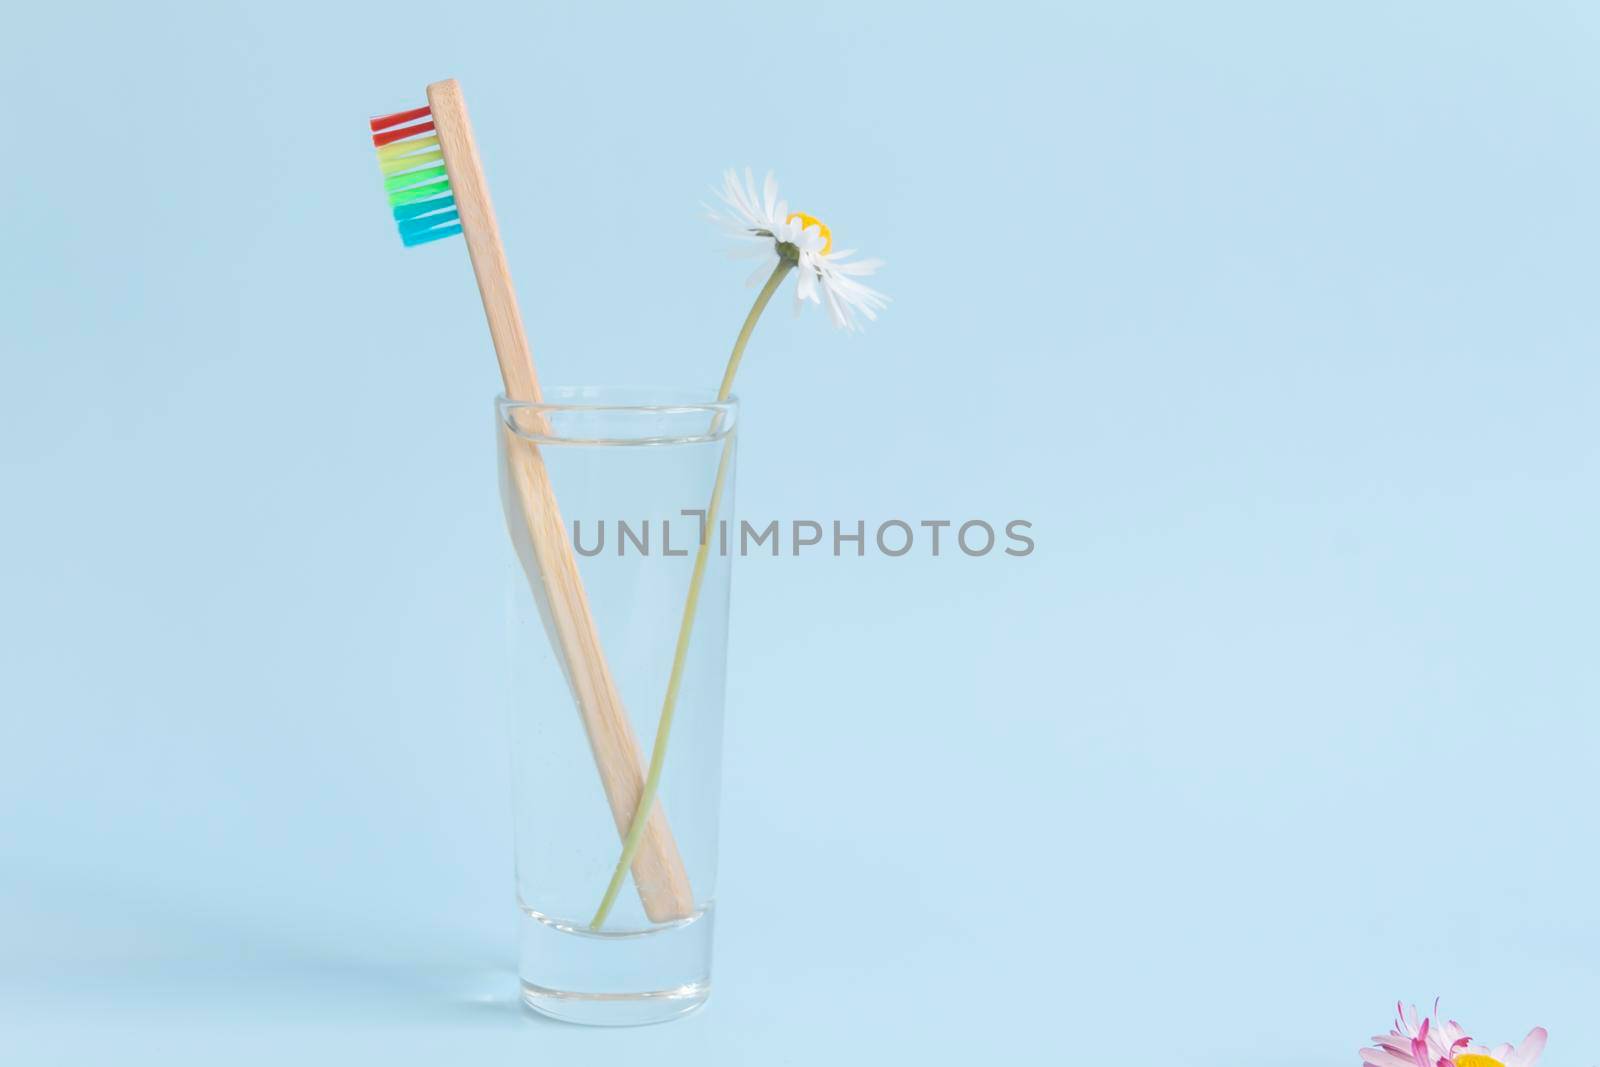 An ecological wooden toothbrush, a glass with clean, clear water and a white daisy on a blue background. by Alla_Yurtayeva